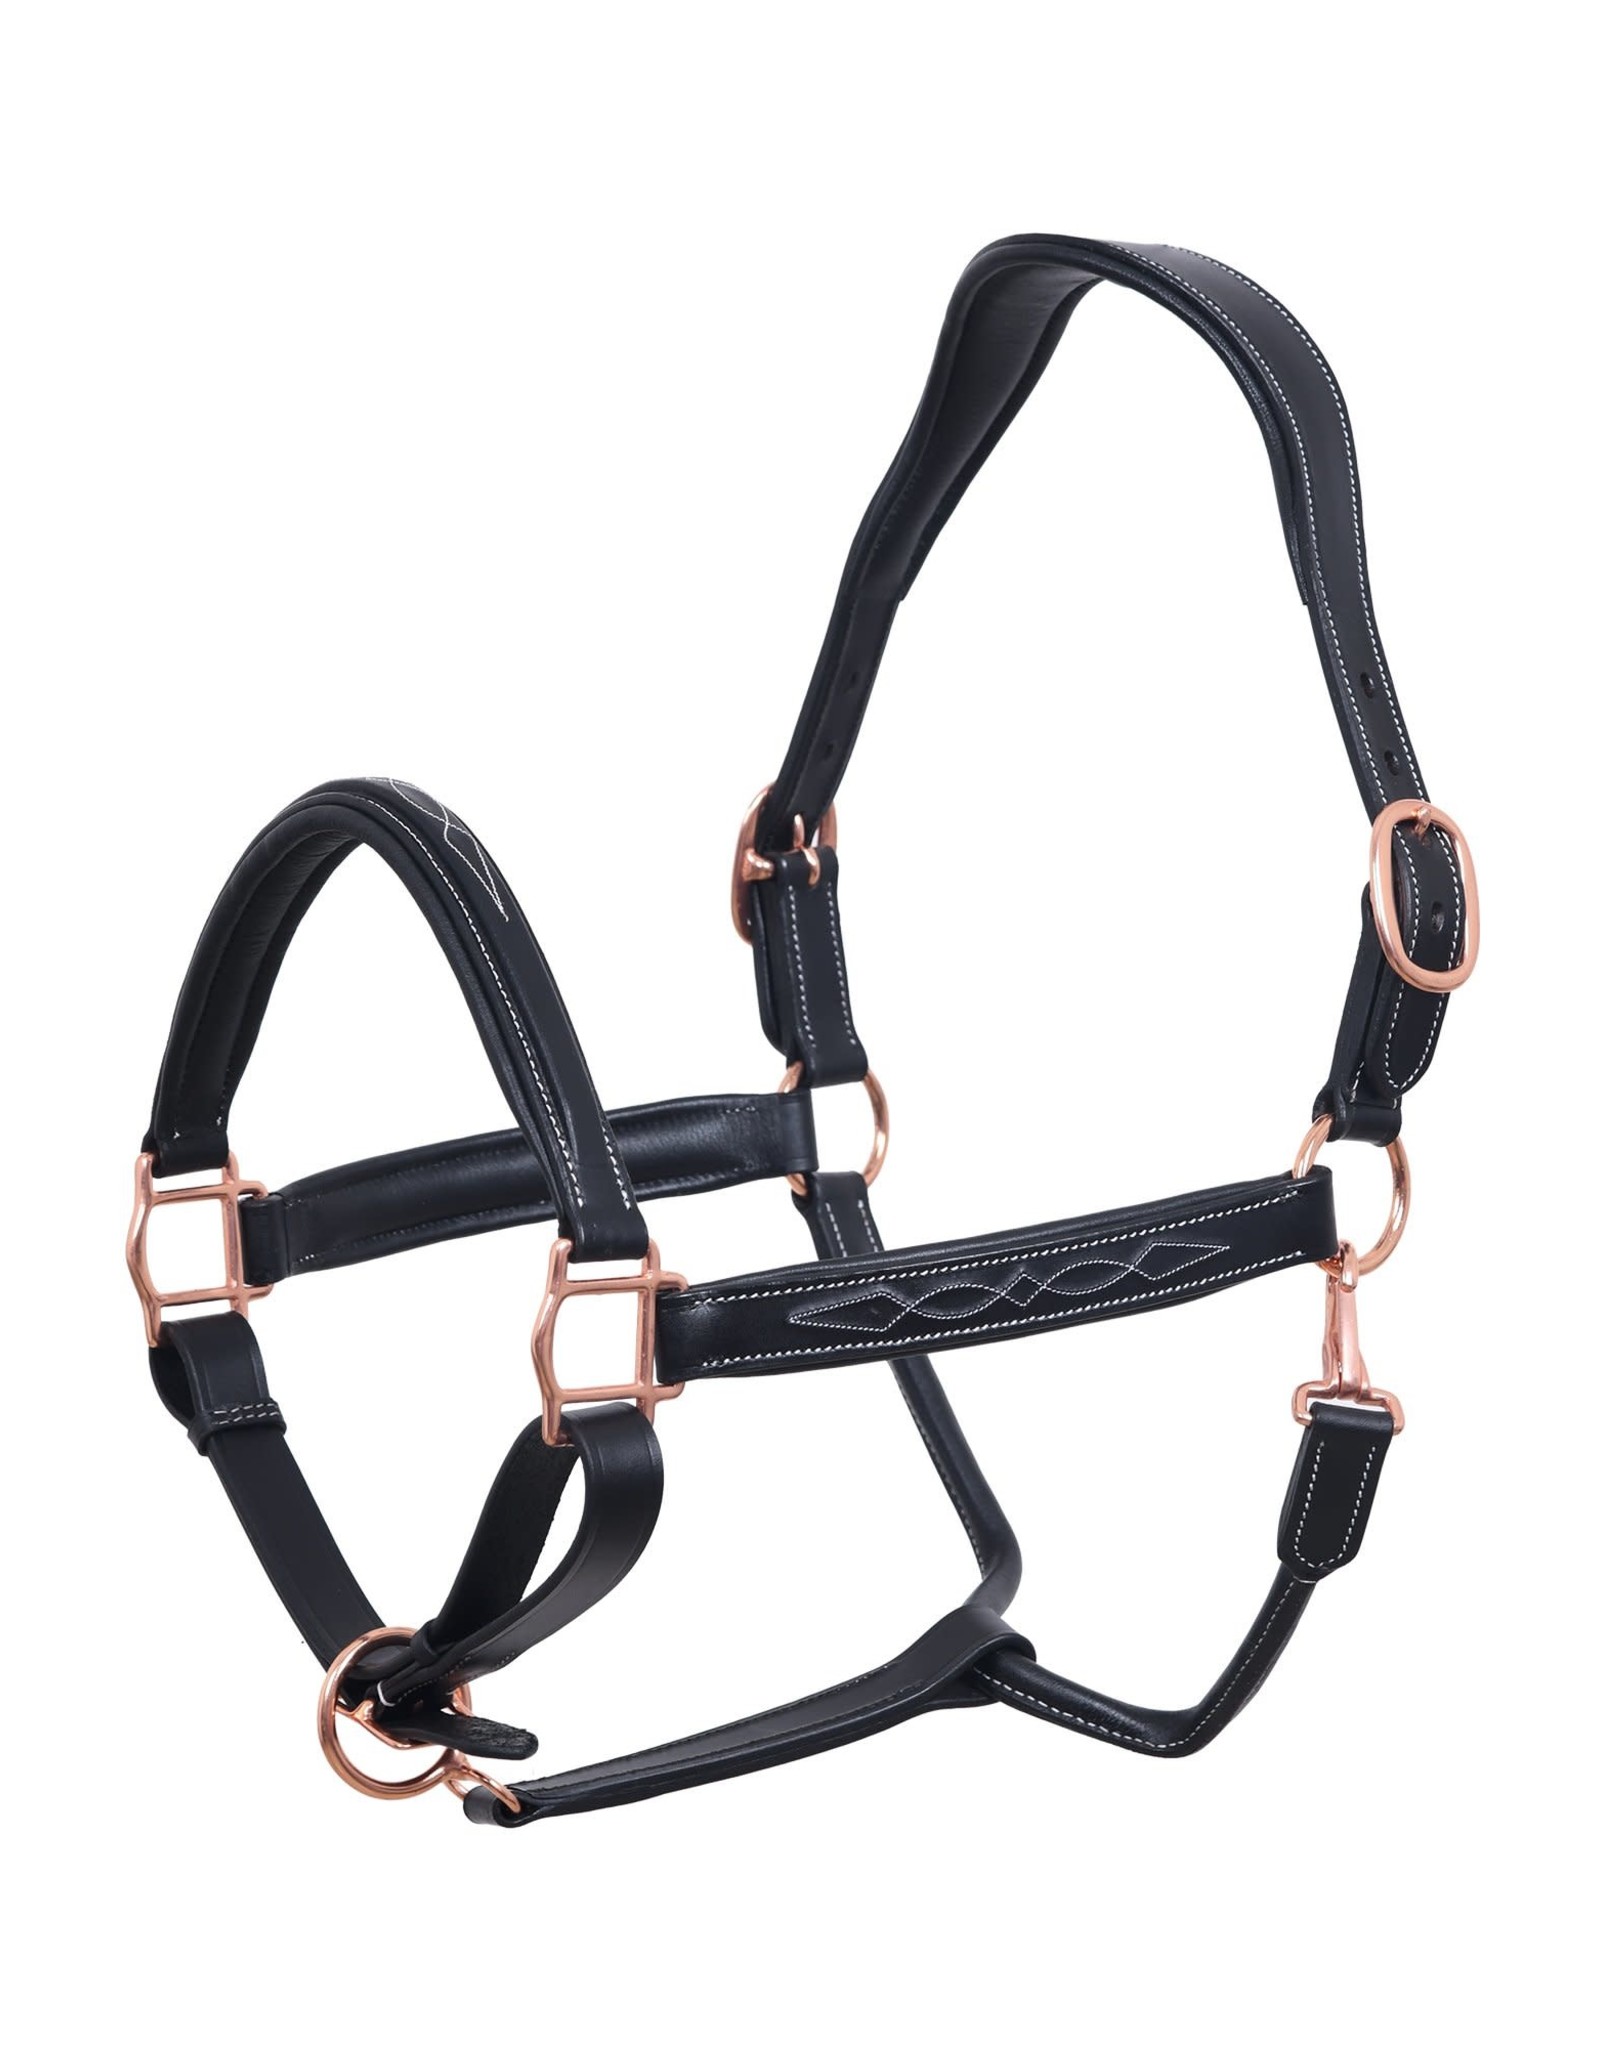 PUP & PONY CO BELMONT COLLECTION ANATOMICAL HALTER